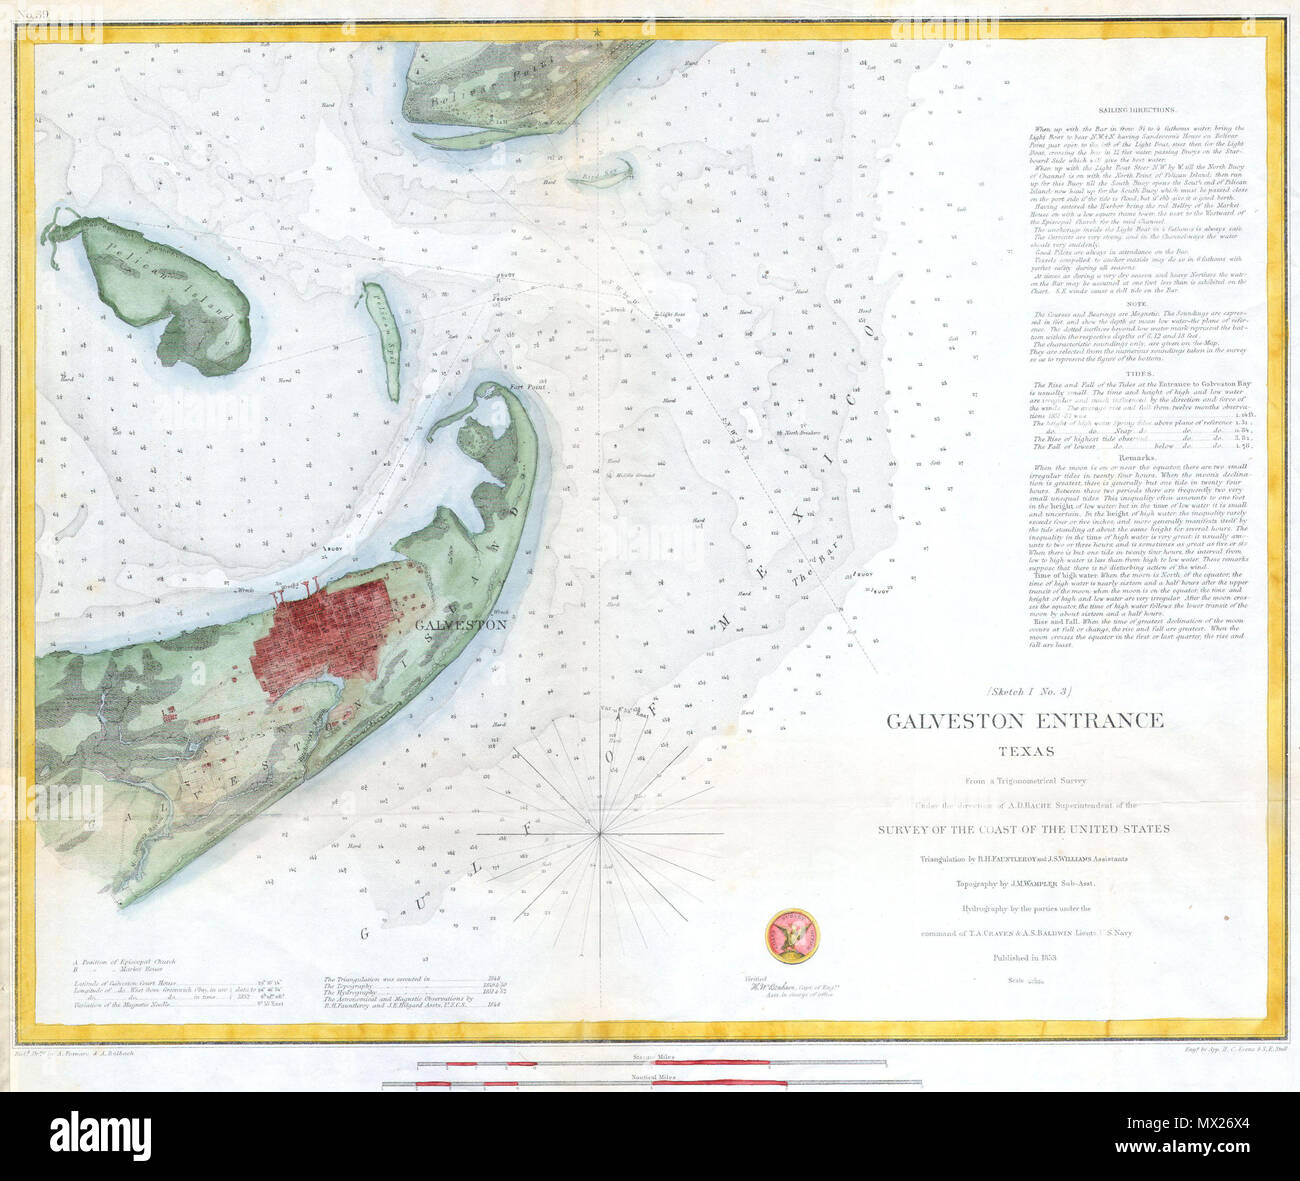 . (Sketch 1 No. 3) Galveston Entrance Texas.  English: A rare hand colored 1853 costal chart of Galveston harbor, Texas and the finest chart in this series. Includes detailed sailing instructions, depth soundings, and impressive inland detail of the city of Galveston and vicinity. Triangulations were accomplished in 1848 by R.H. Fauntleroy and J.S. Williams, the topography was accomplished in 1849 & 1850 by J.M. Wampler, while the hydrography was under the direction of T.A. Craven and A.S. Baldwin in 1851 and 1852.. Published under the direction of A. D. Bache for the 1853 Report of the Superi Stock Photo